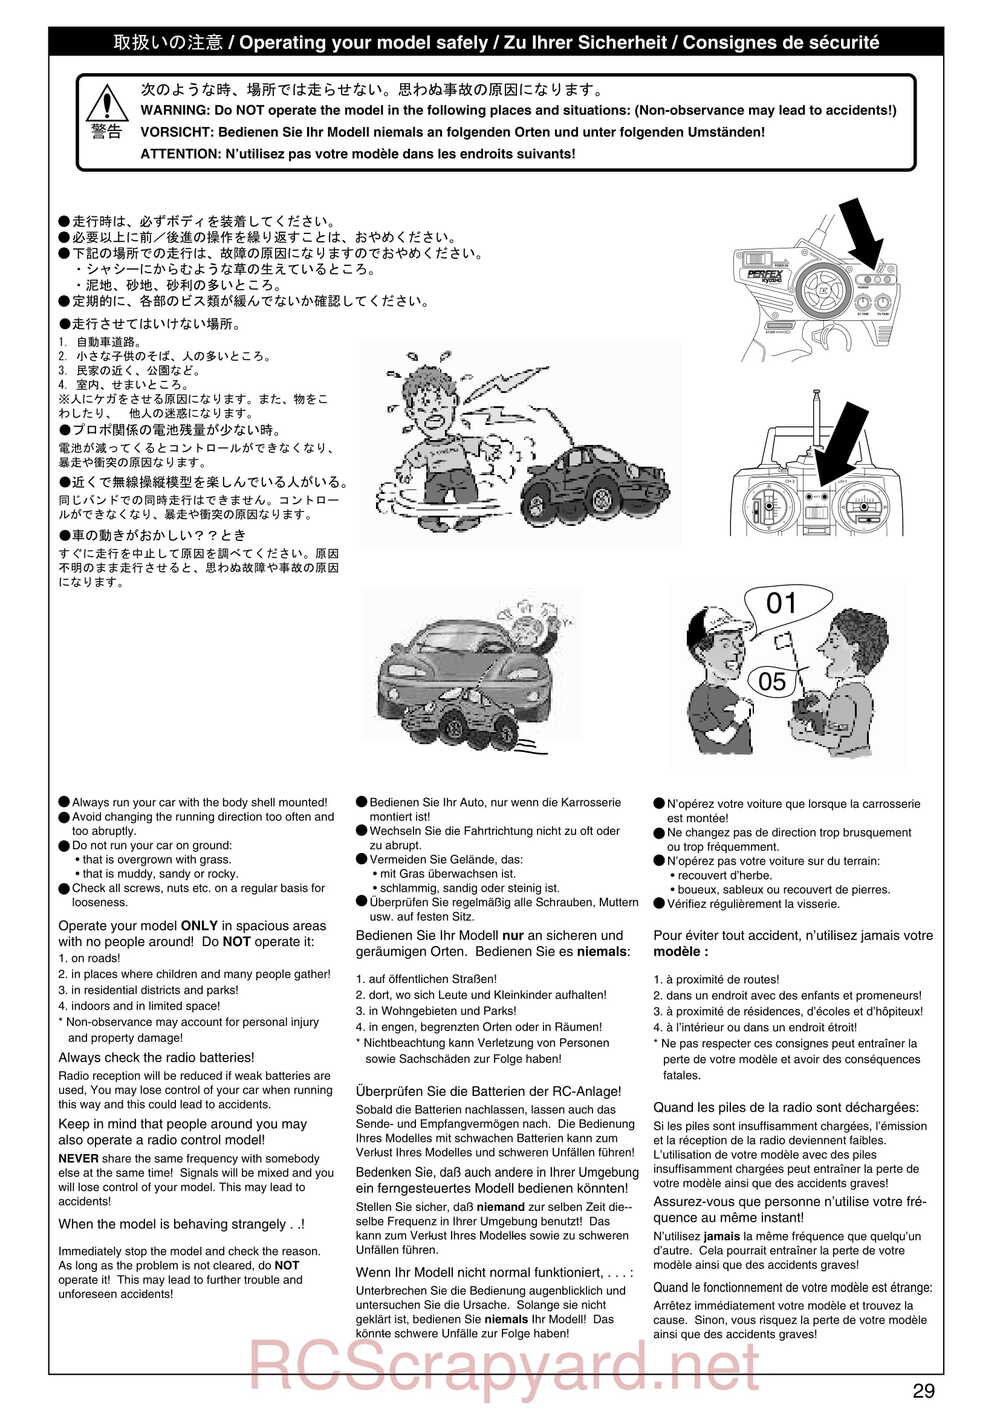 Kyosho - 31122 - V-One S2 - Manual - Page 29